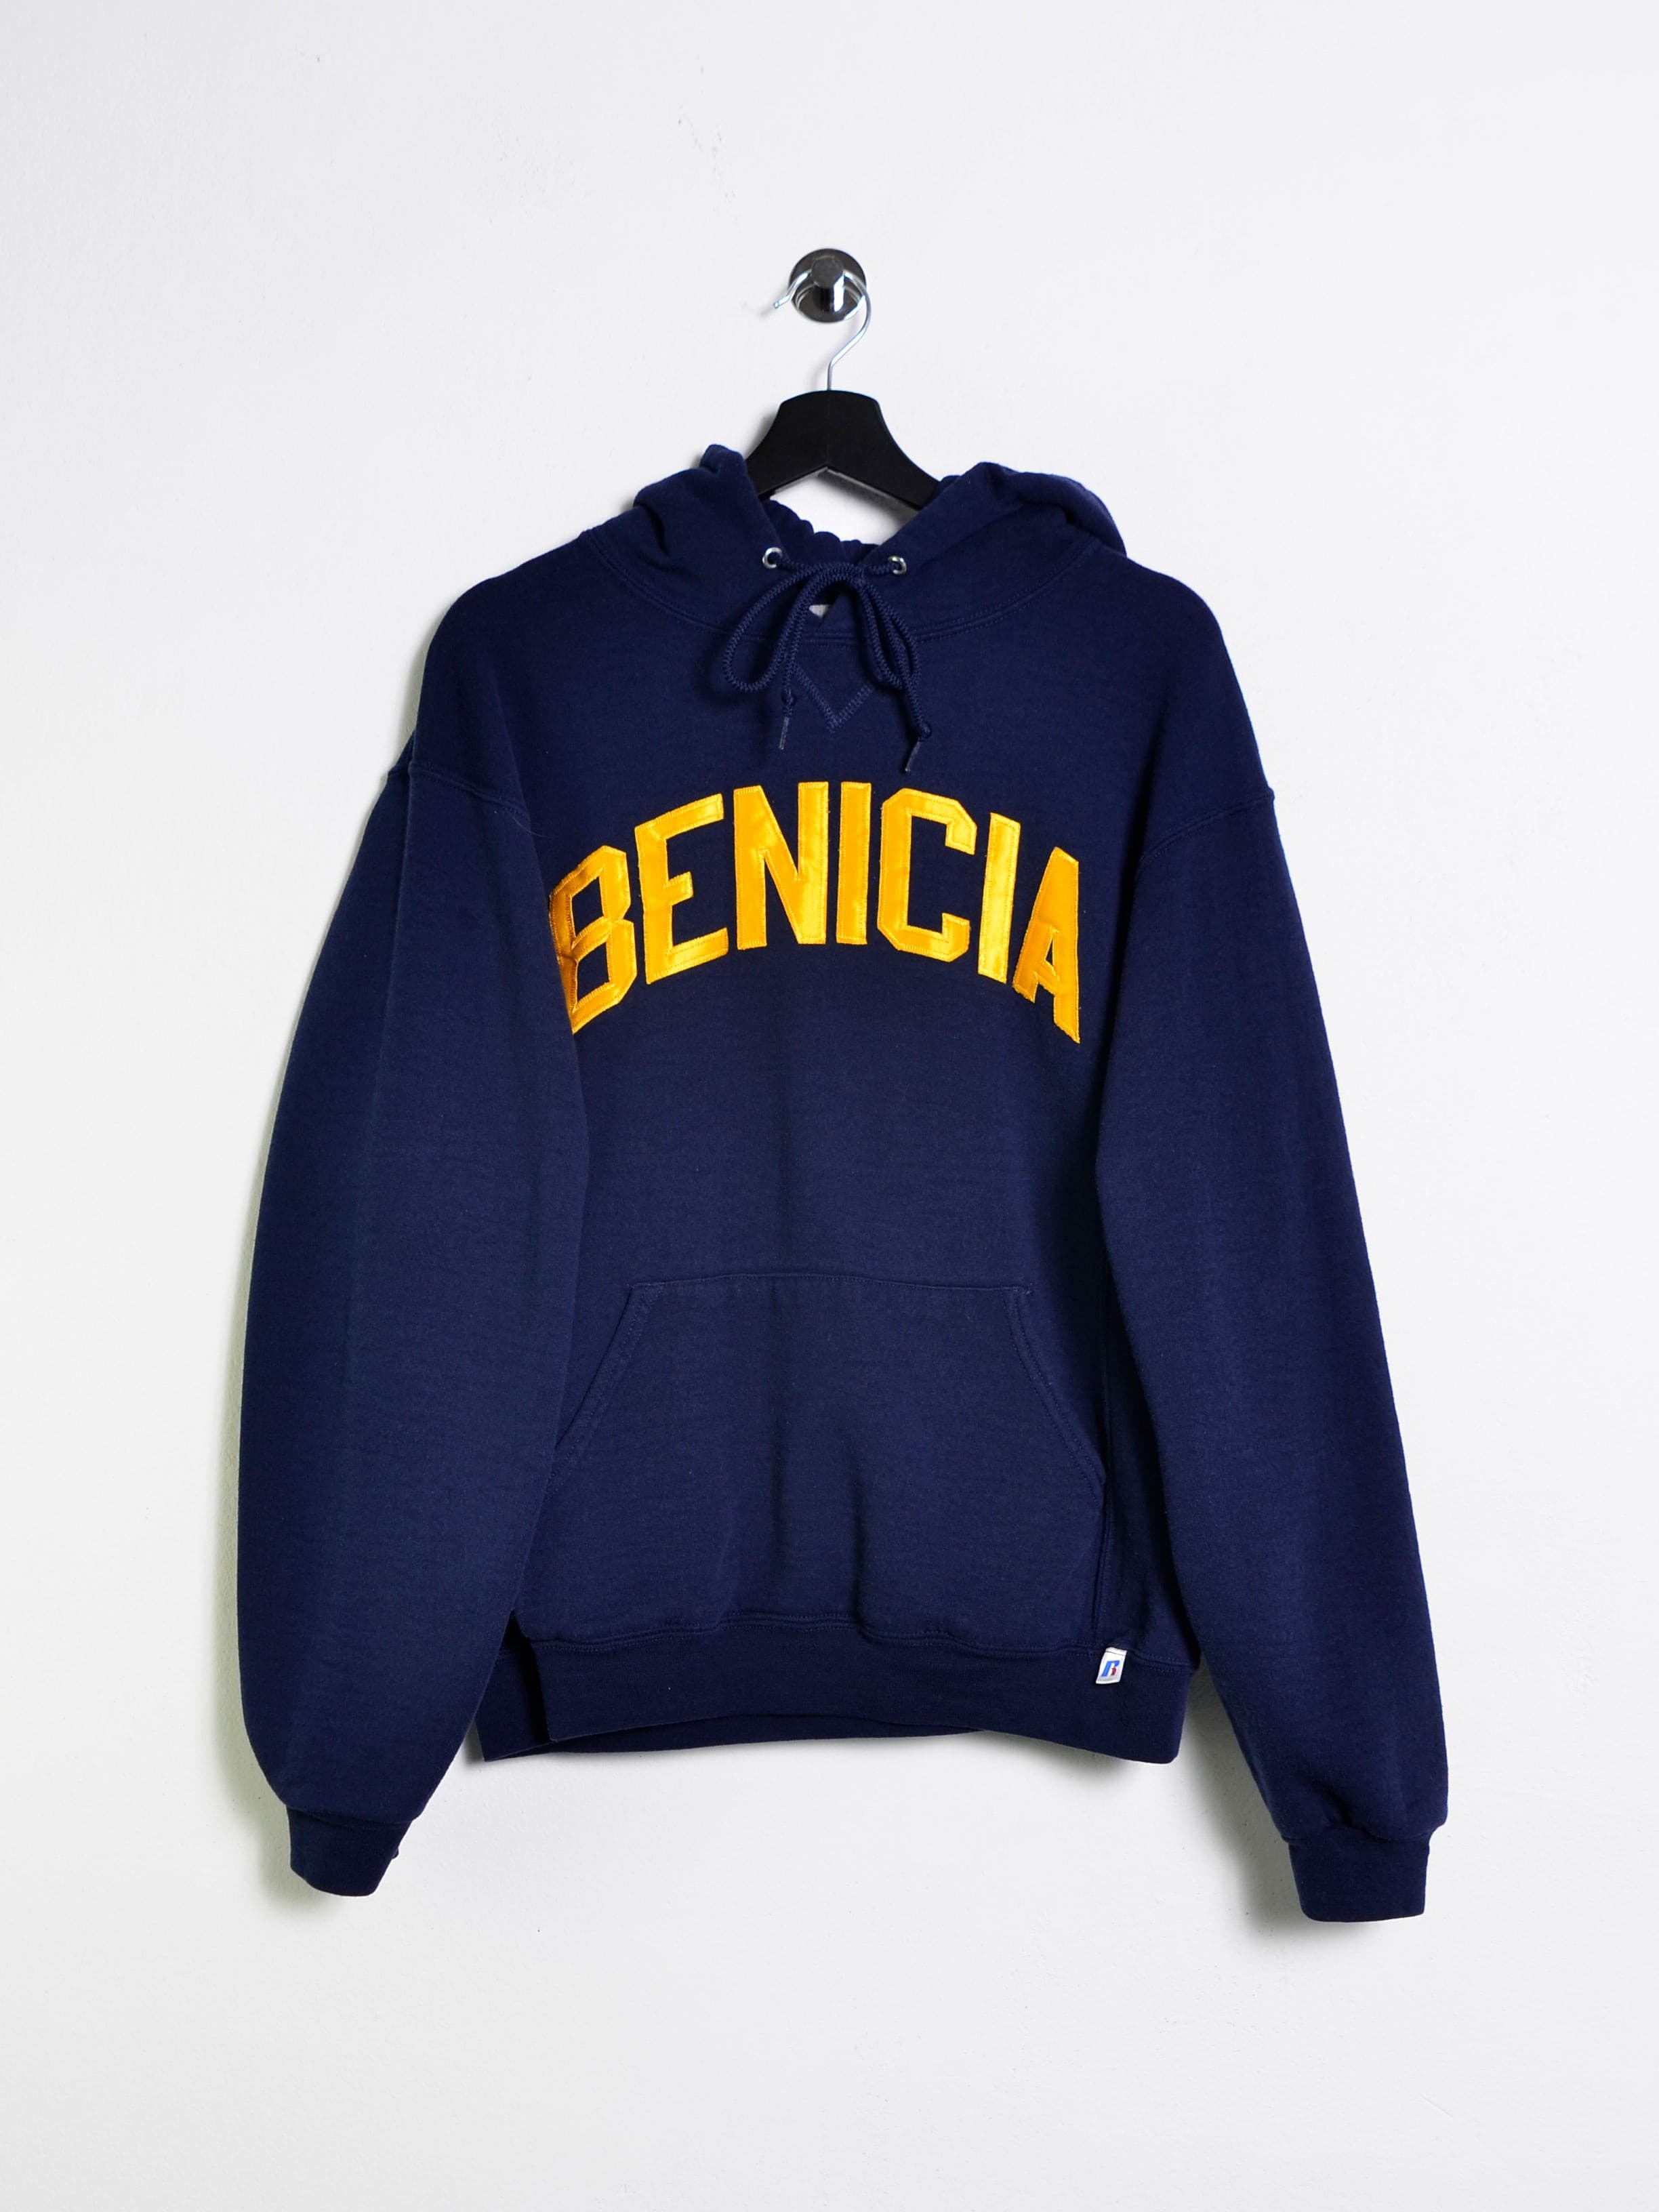 Benicia College Spellout Hoodie Blue // Small - RHAGHOUSE VINTAGE